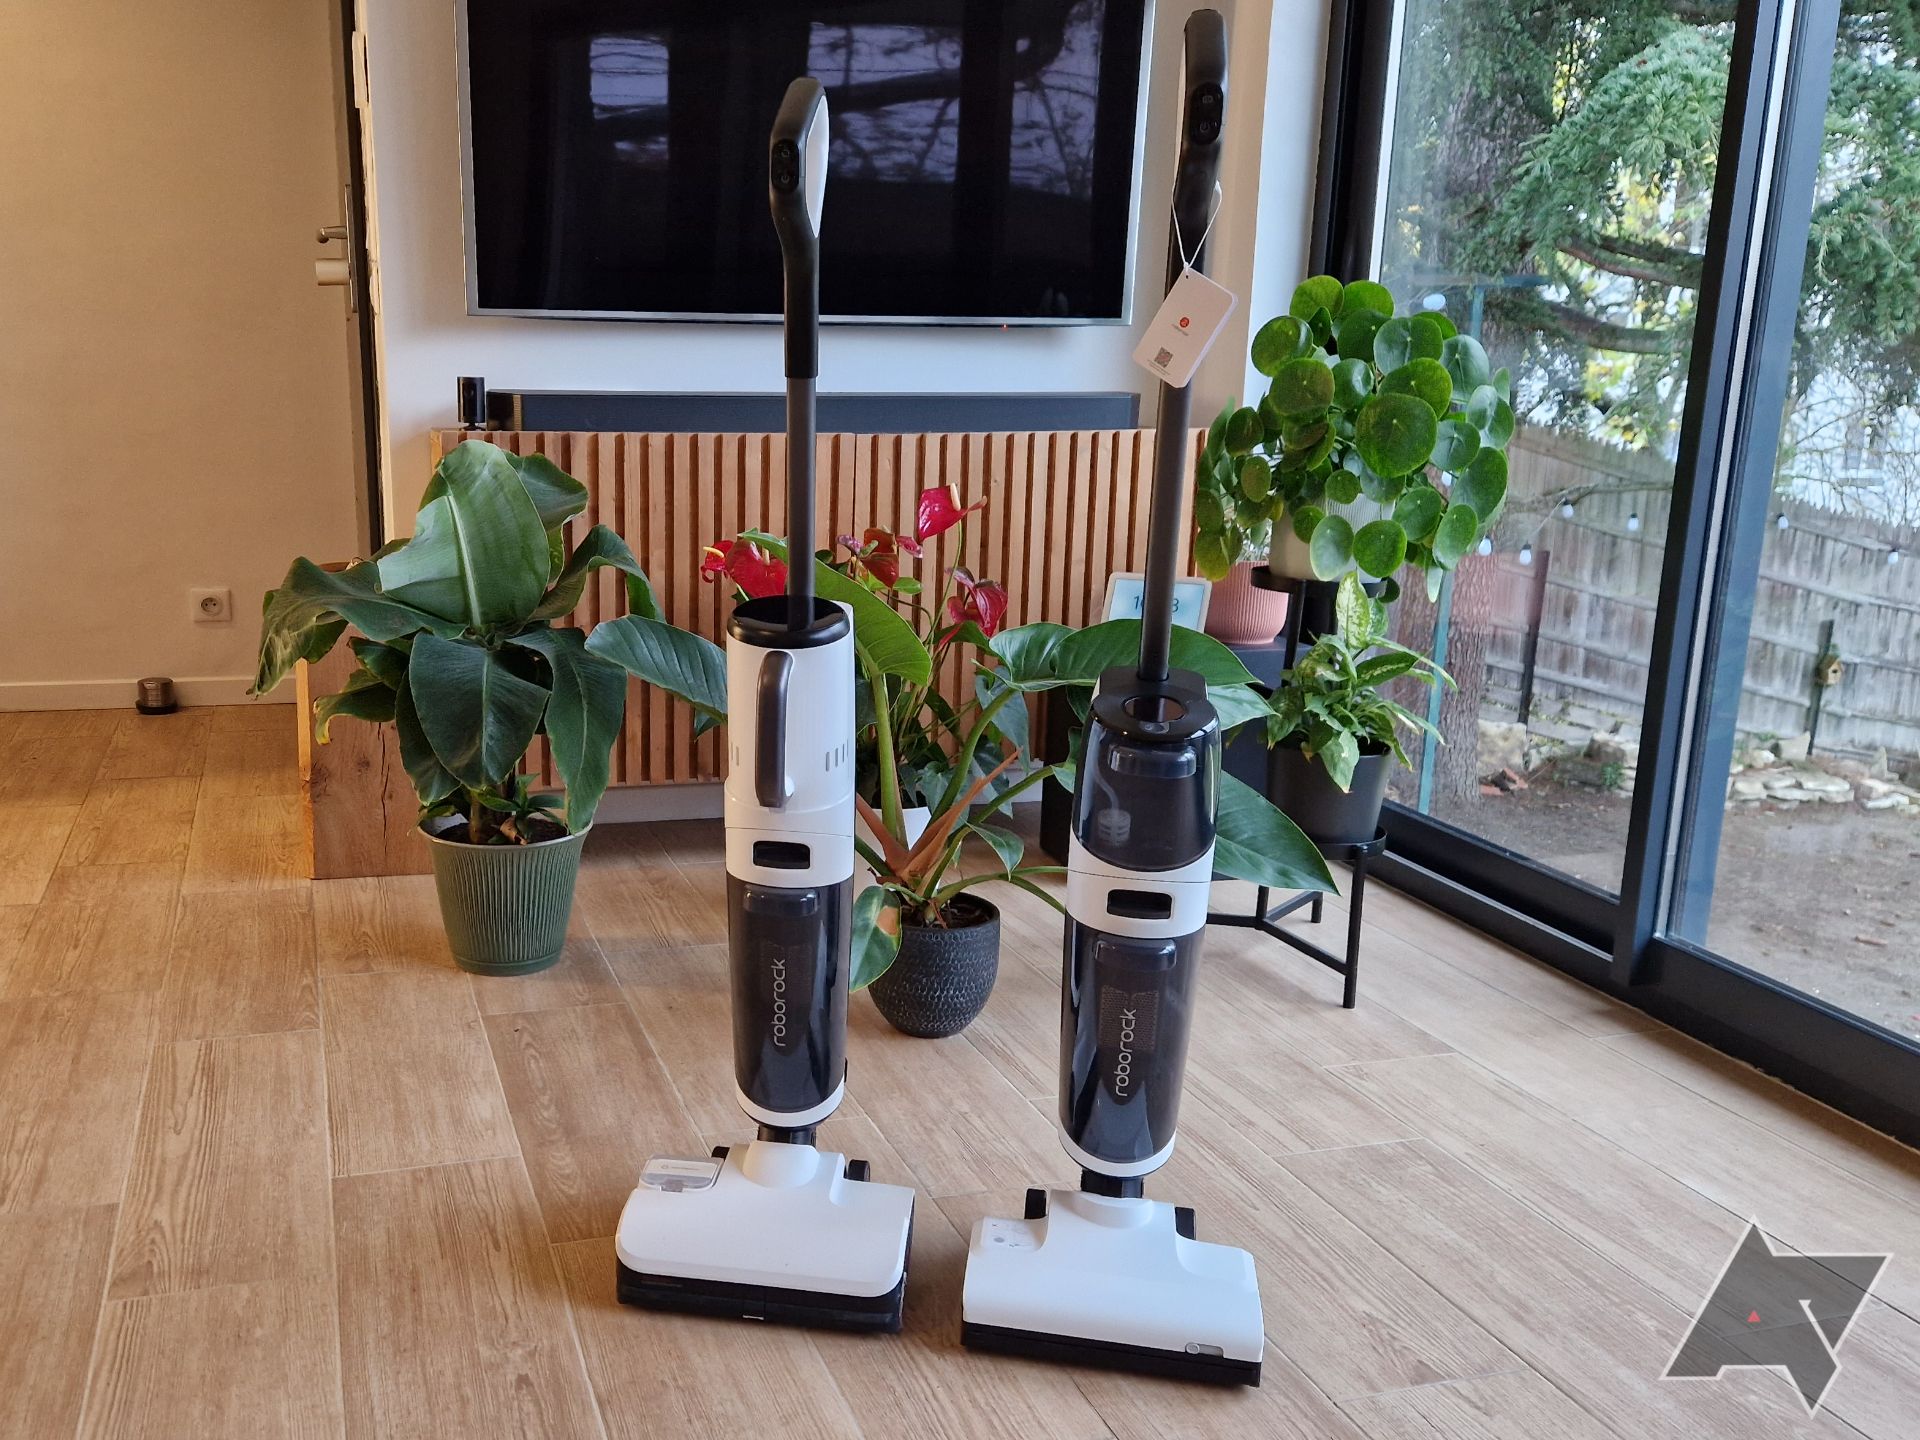 Picture of the Roborock Dyad Pro Combo and Dyad Air (right) next to each other, with plants and a TV in the background